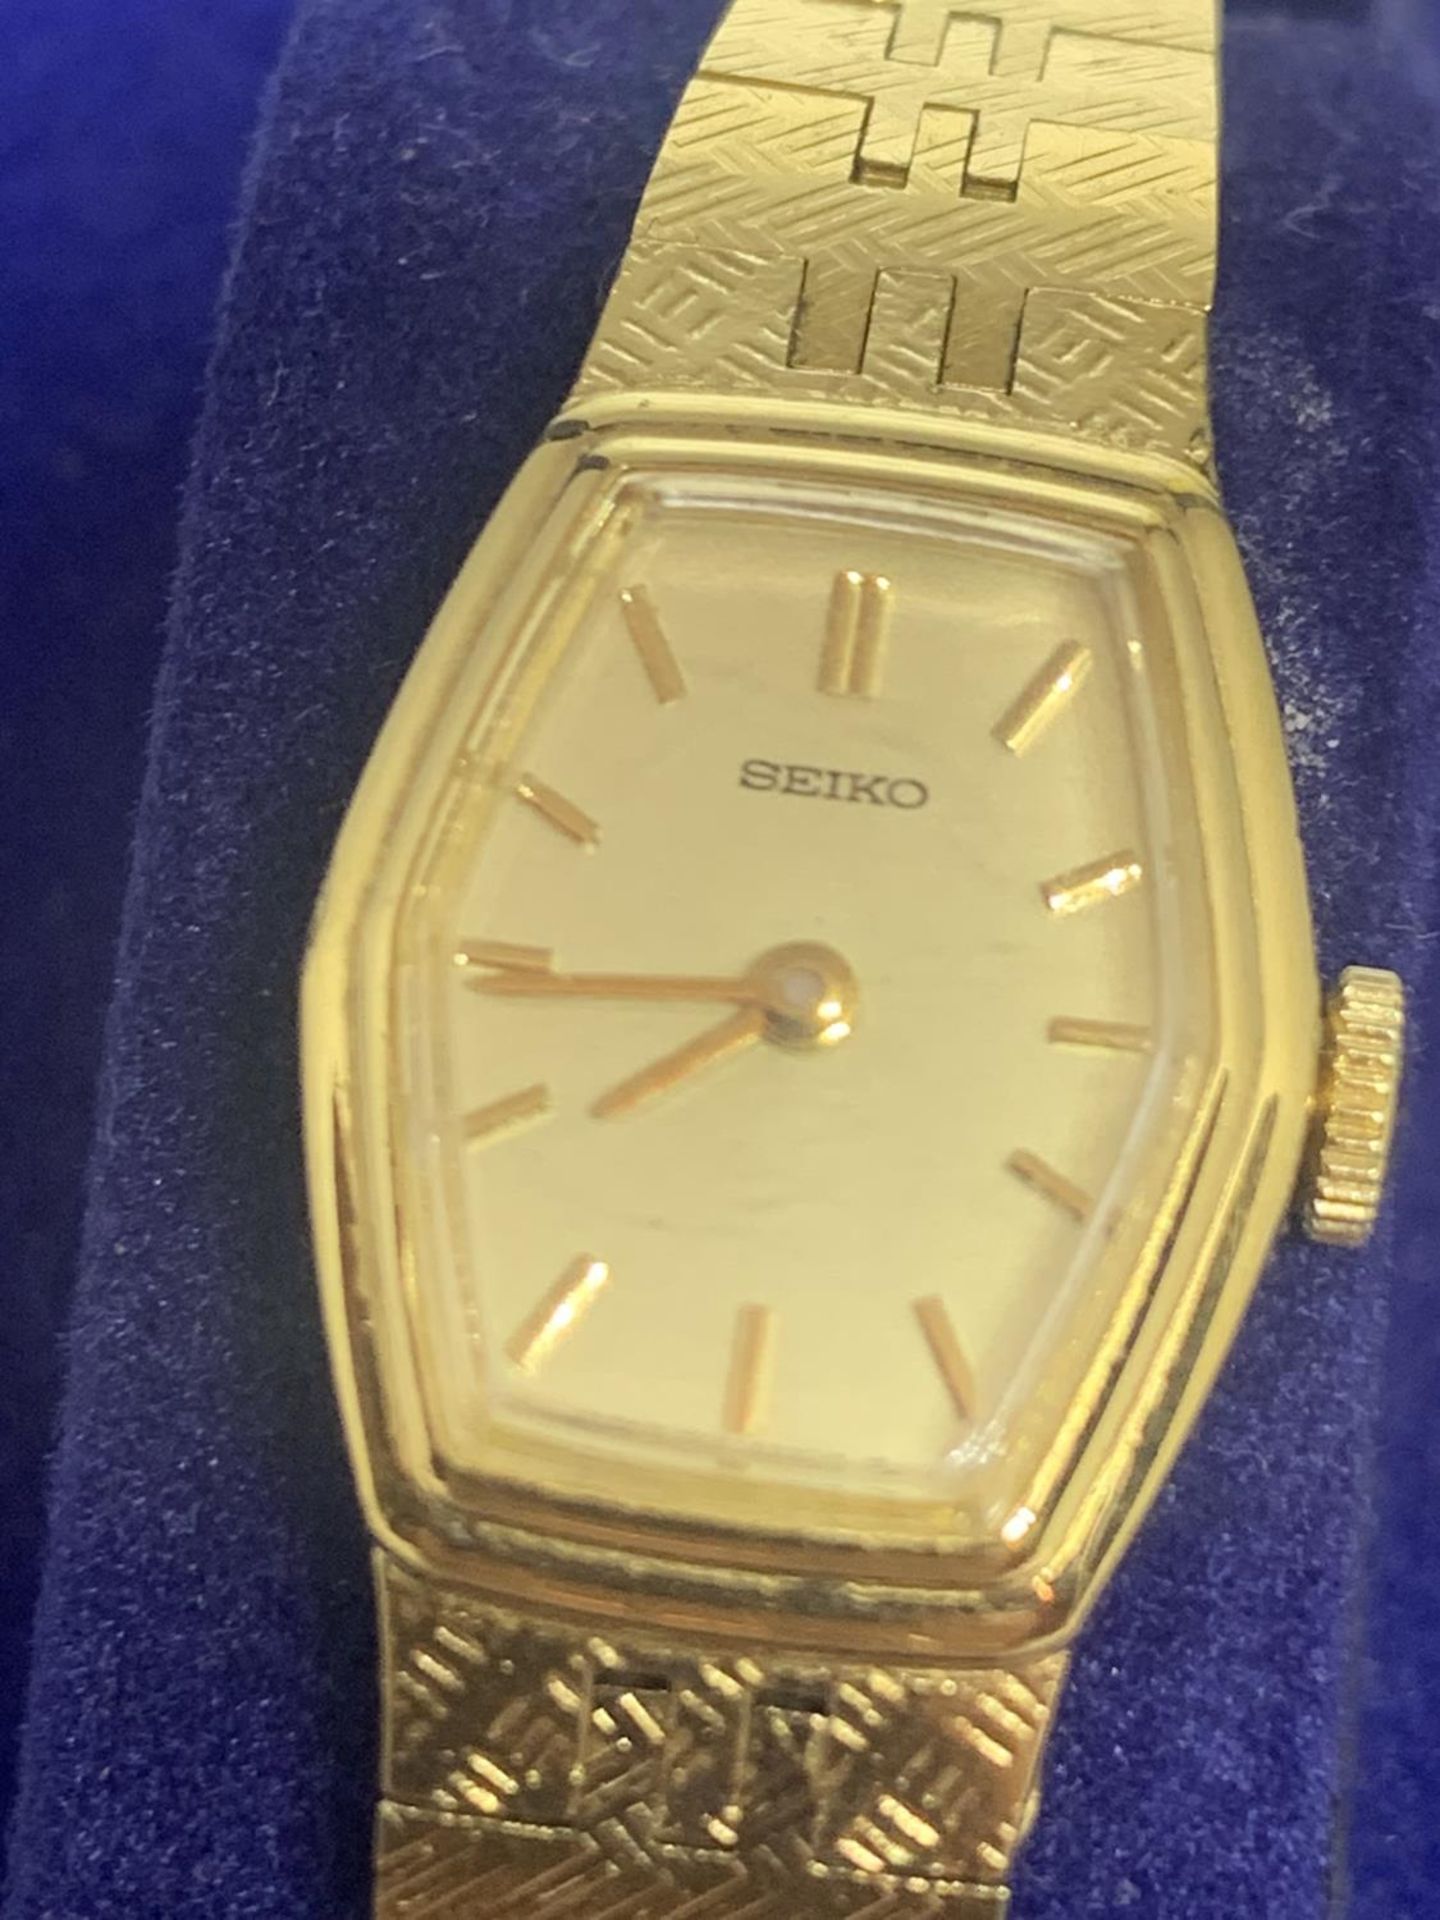 A LADIES SEIKO WRISTWATCH WITH A PRESENTATION BOX, SEEN WORKING BUT NO WARRANTY - Image 4 of 4